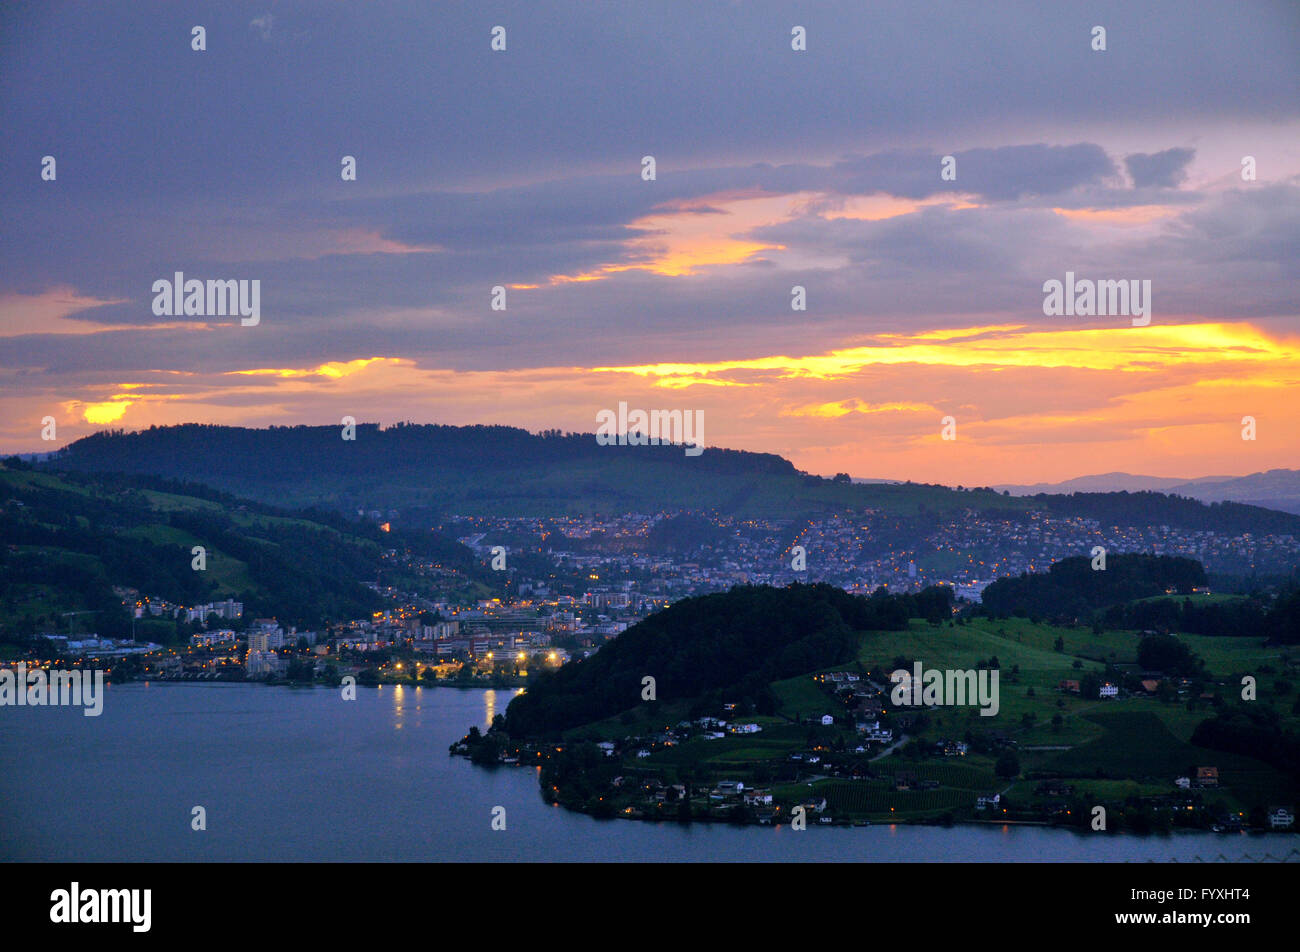 Lake Lucerne, Lucerne, Central Switzerland, Switzerland / Vierwaldstattersee, Vierwaldstättersee, Lake of the Four Forested Cantons Stock Photo